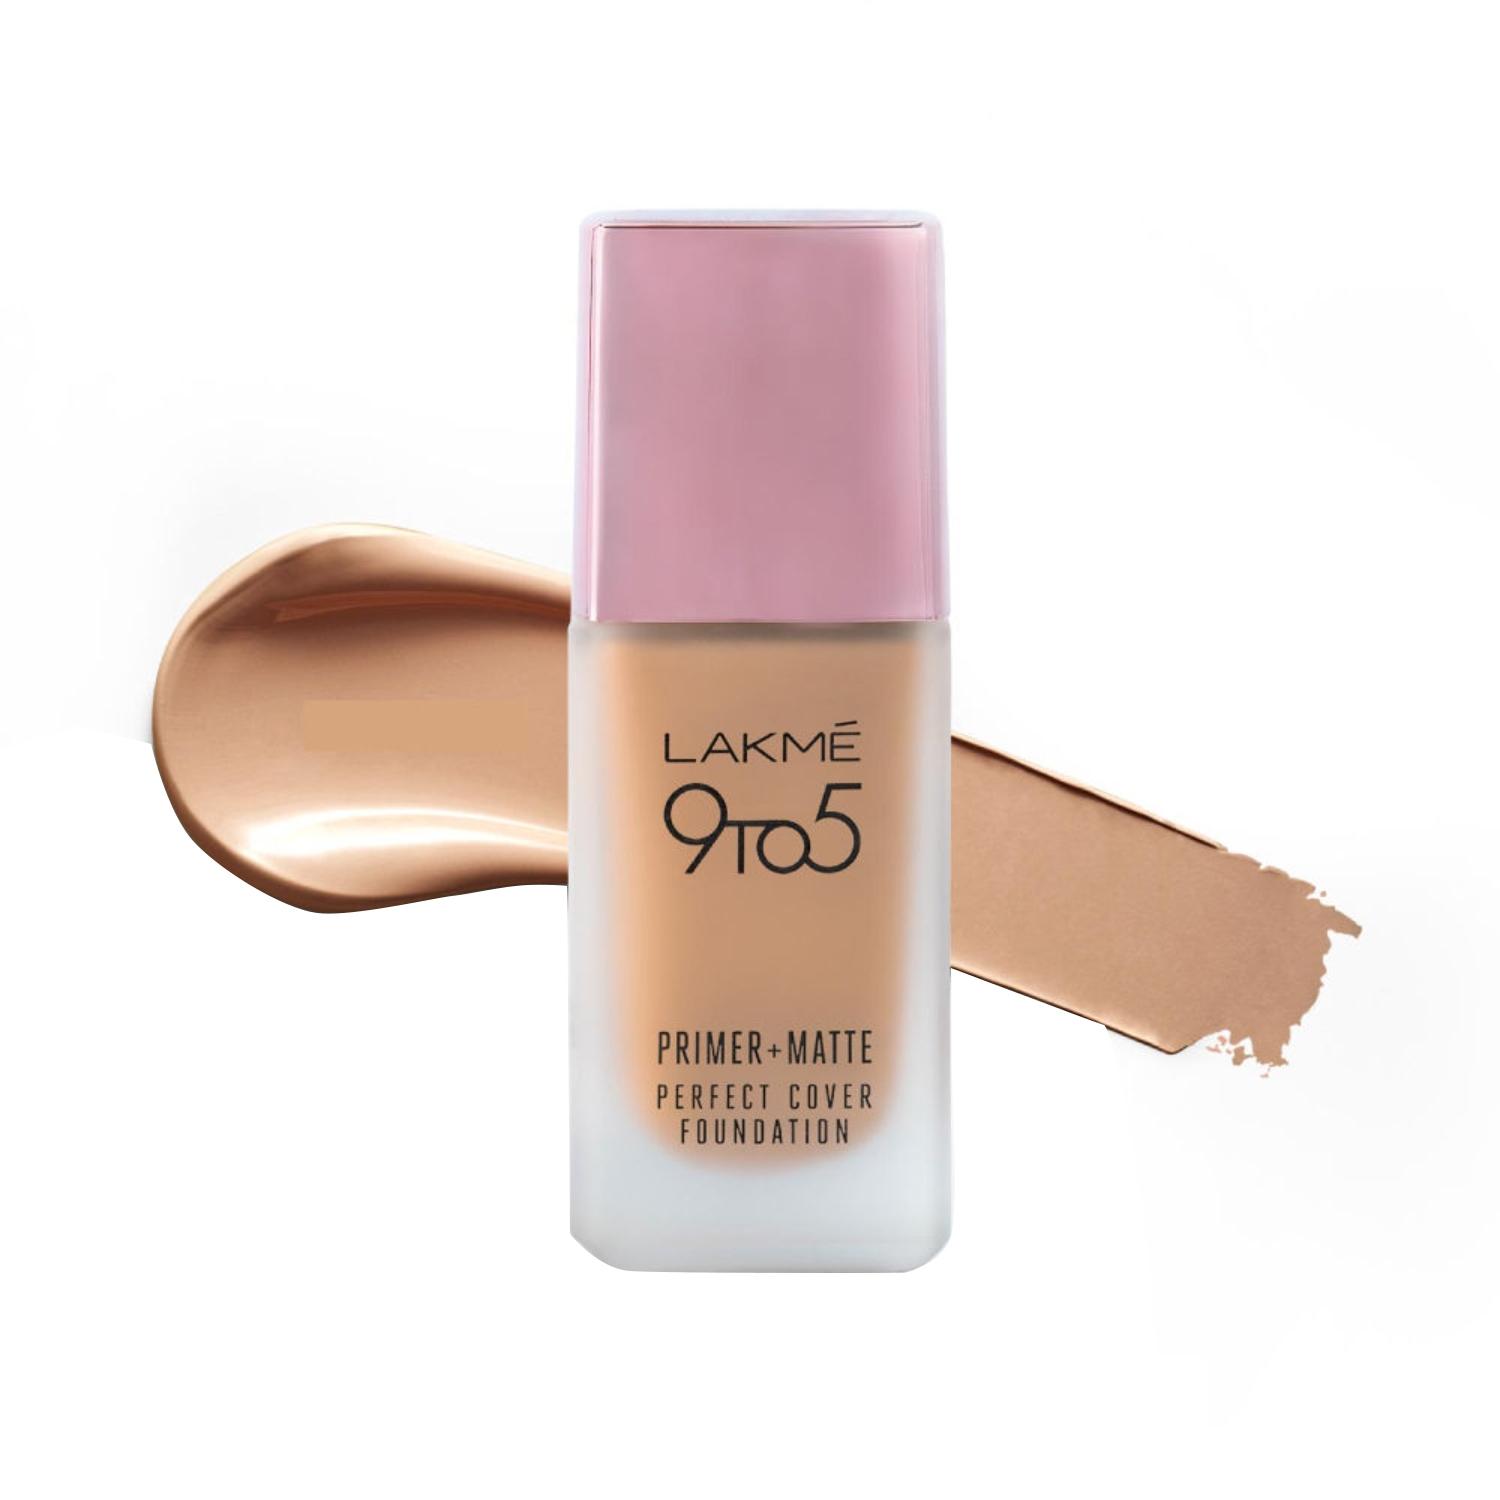 lakme 9 to 5 primer + matte perfect cover foundation - n200 neutral nude (25ml)